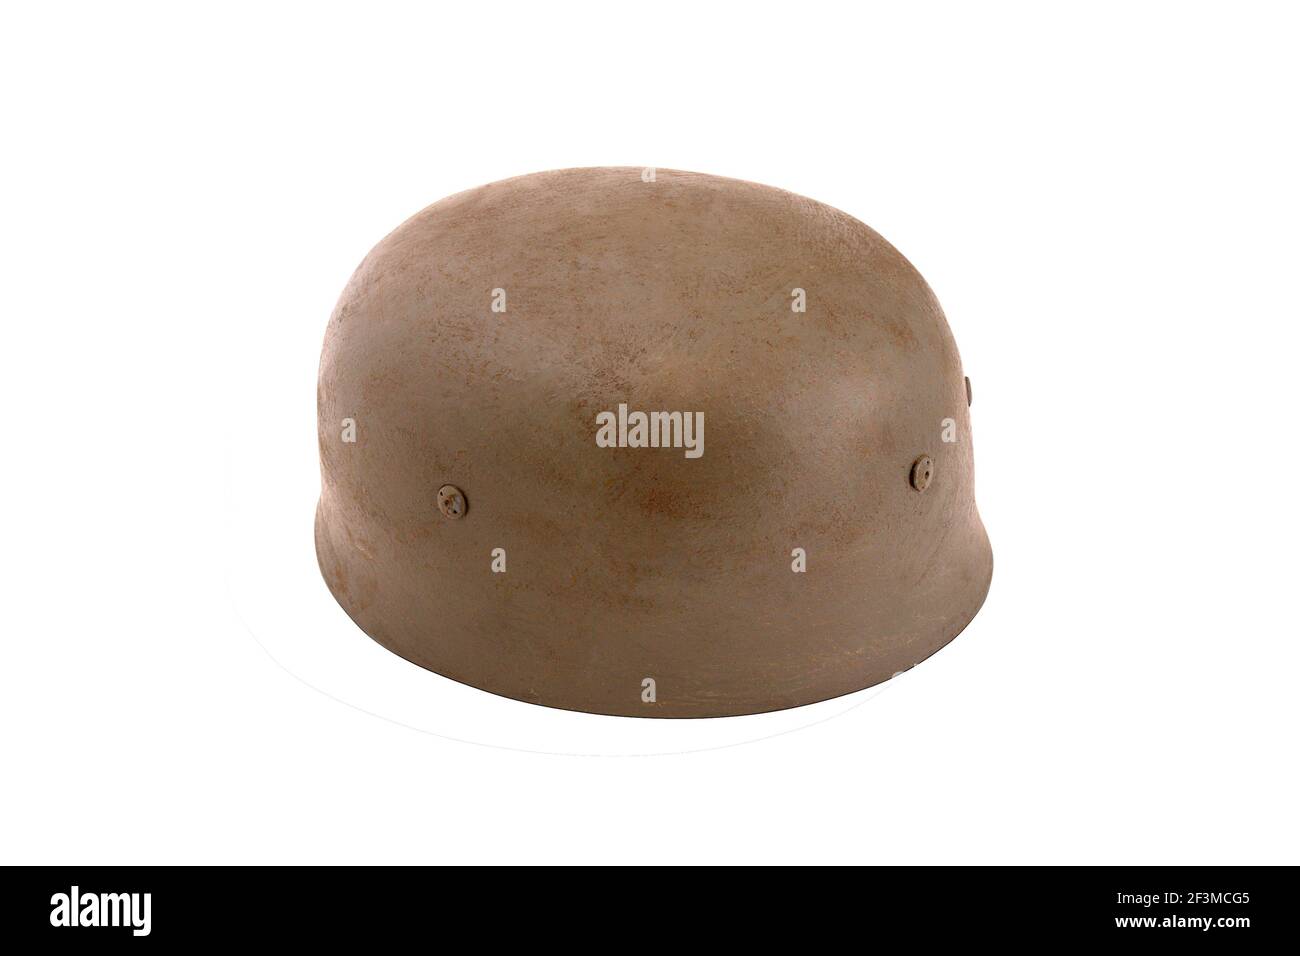 Vintage German army paratrooper battle helmet (model M38) from Second World War period, on isolated background Stock Photo